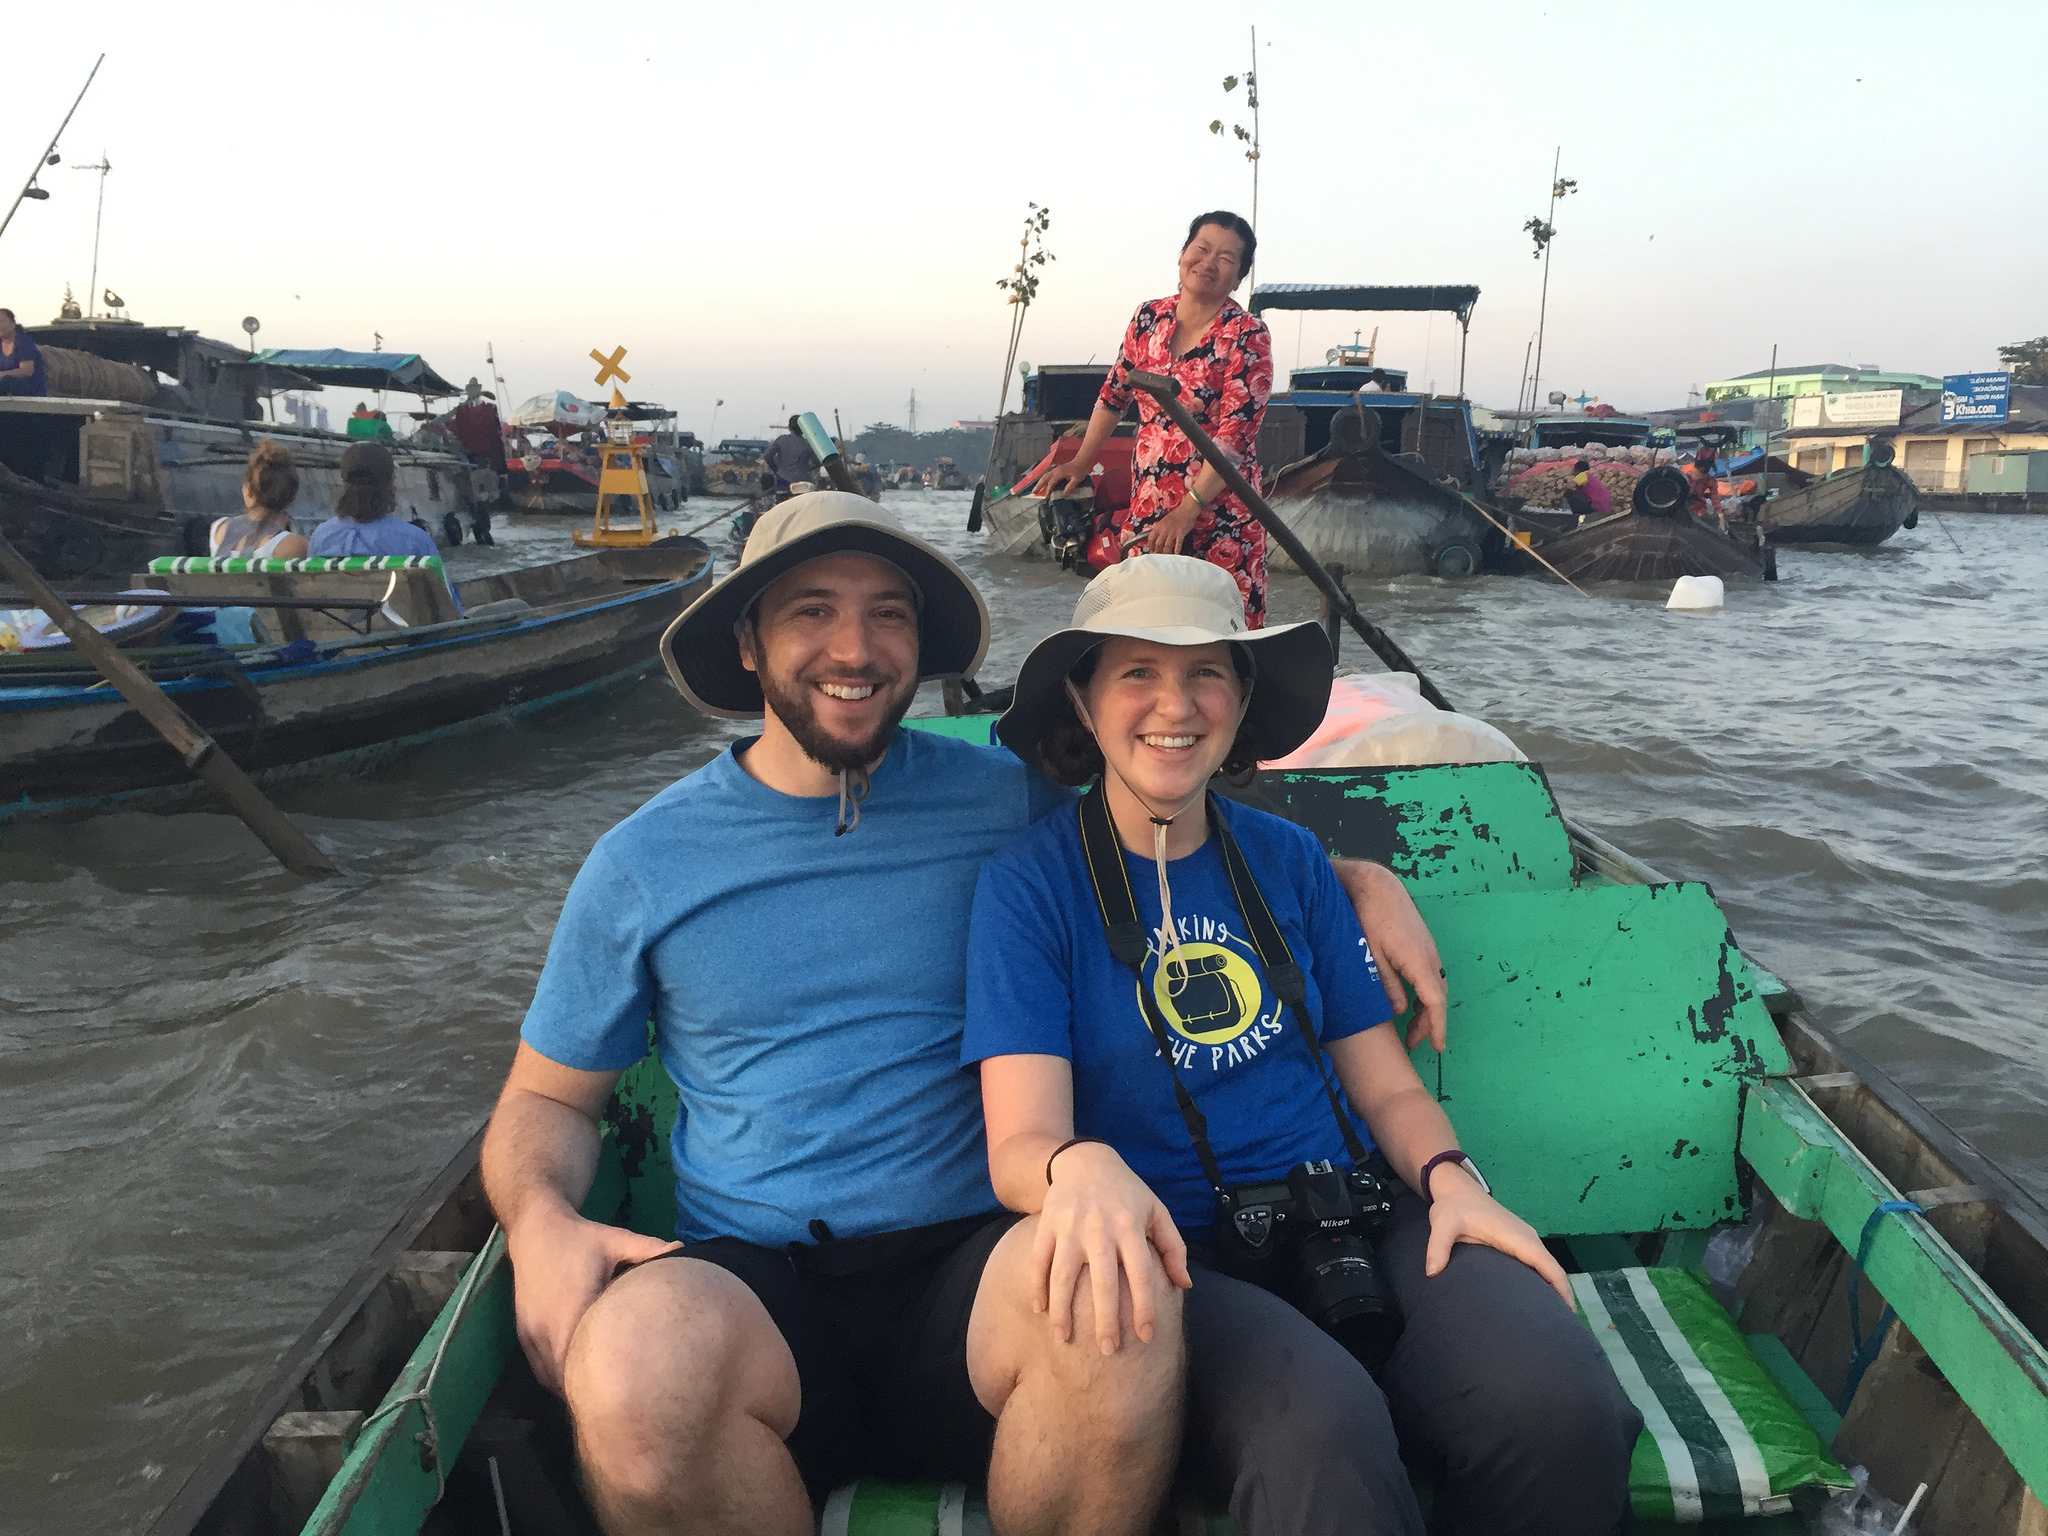 Dan and Heather at the floating market